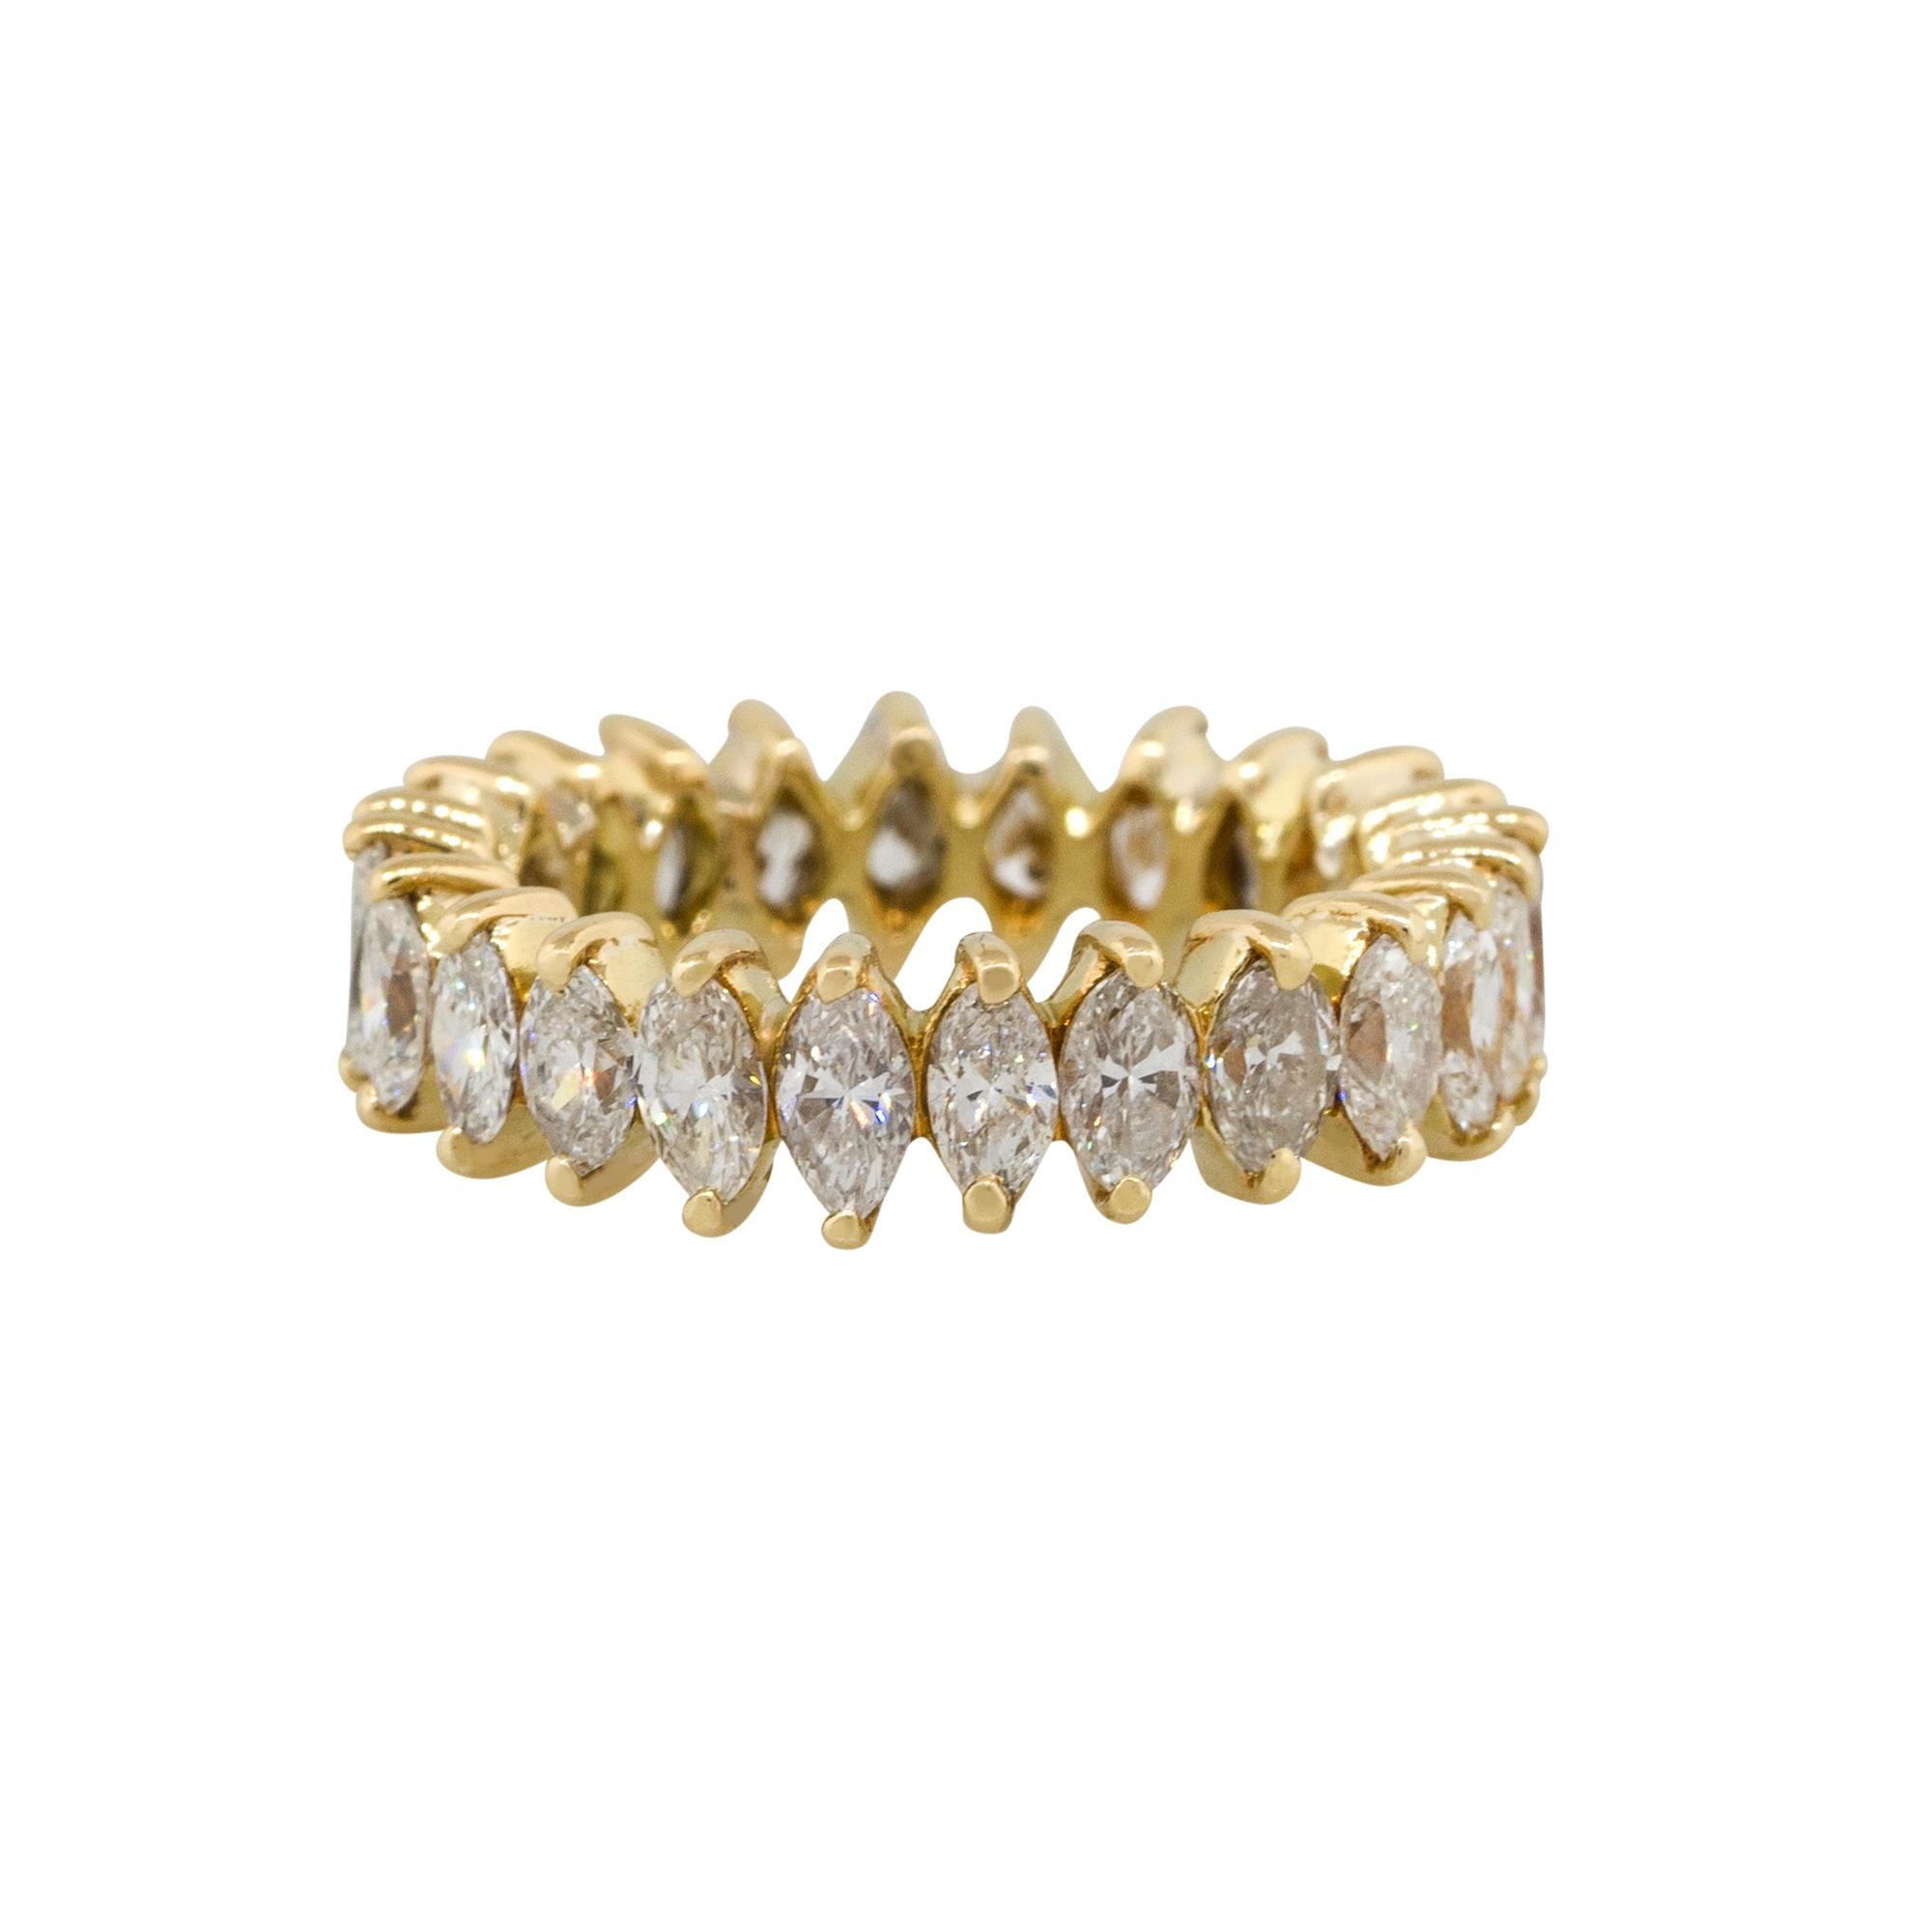 Material: 18k Yellow Gold
Diamond Details: Approximately 3.50ctw marquise diamonds. Diamonds are H/I in color and SI1 in clarity.
Ring Size: 6 (can be sized)
Total Weight: 5.9g (3.7dwt)
Measurements: 0.80